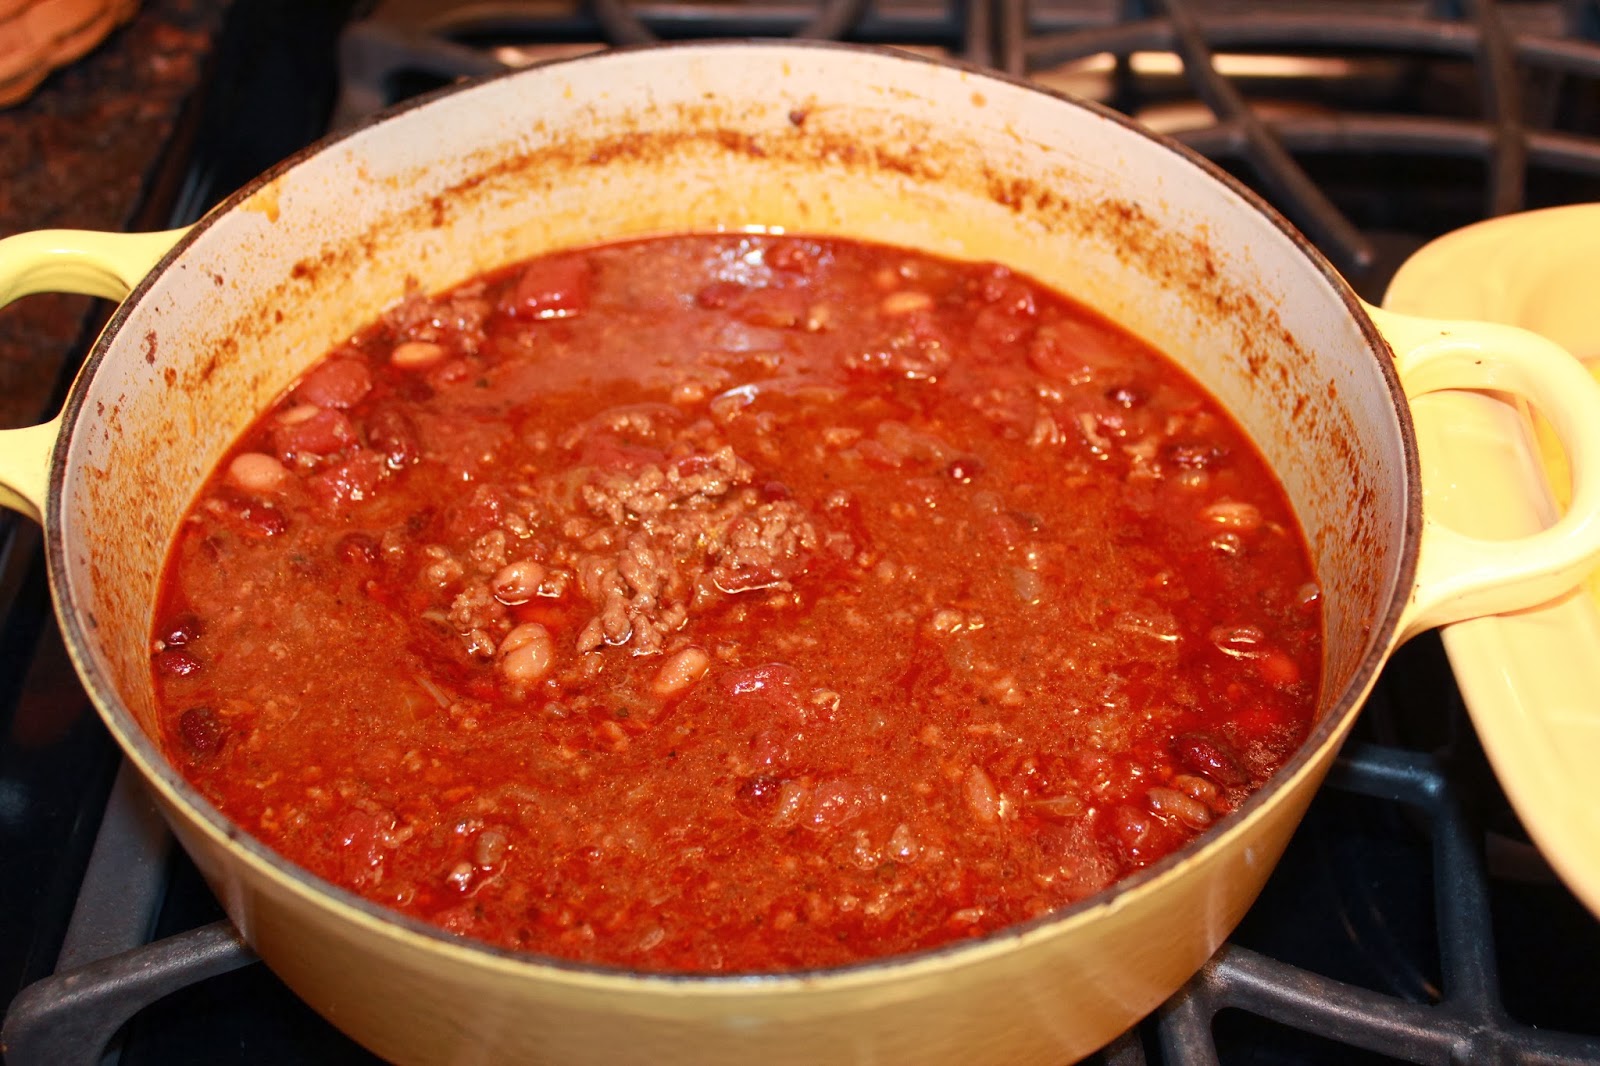 Michelle's Tasty Creations: Homemade Chili